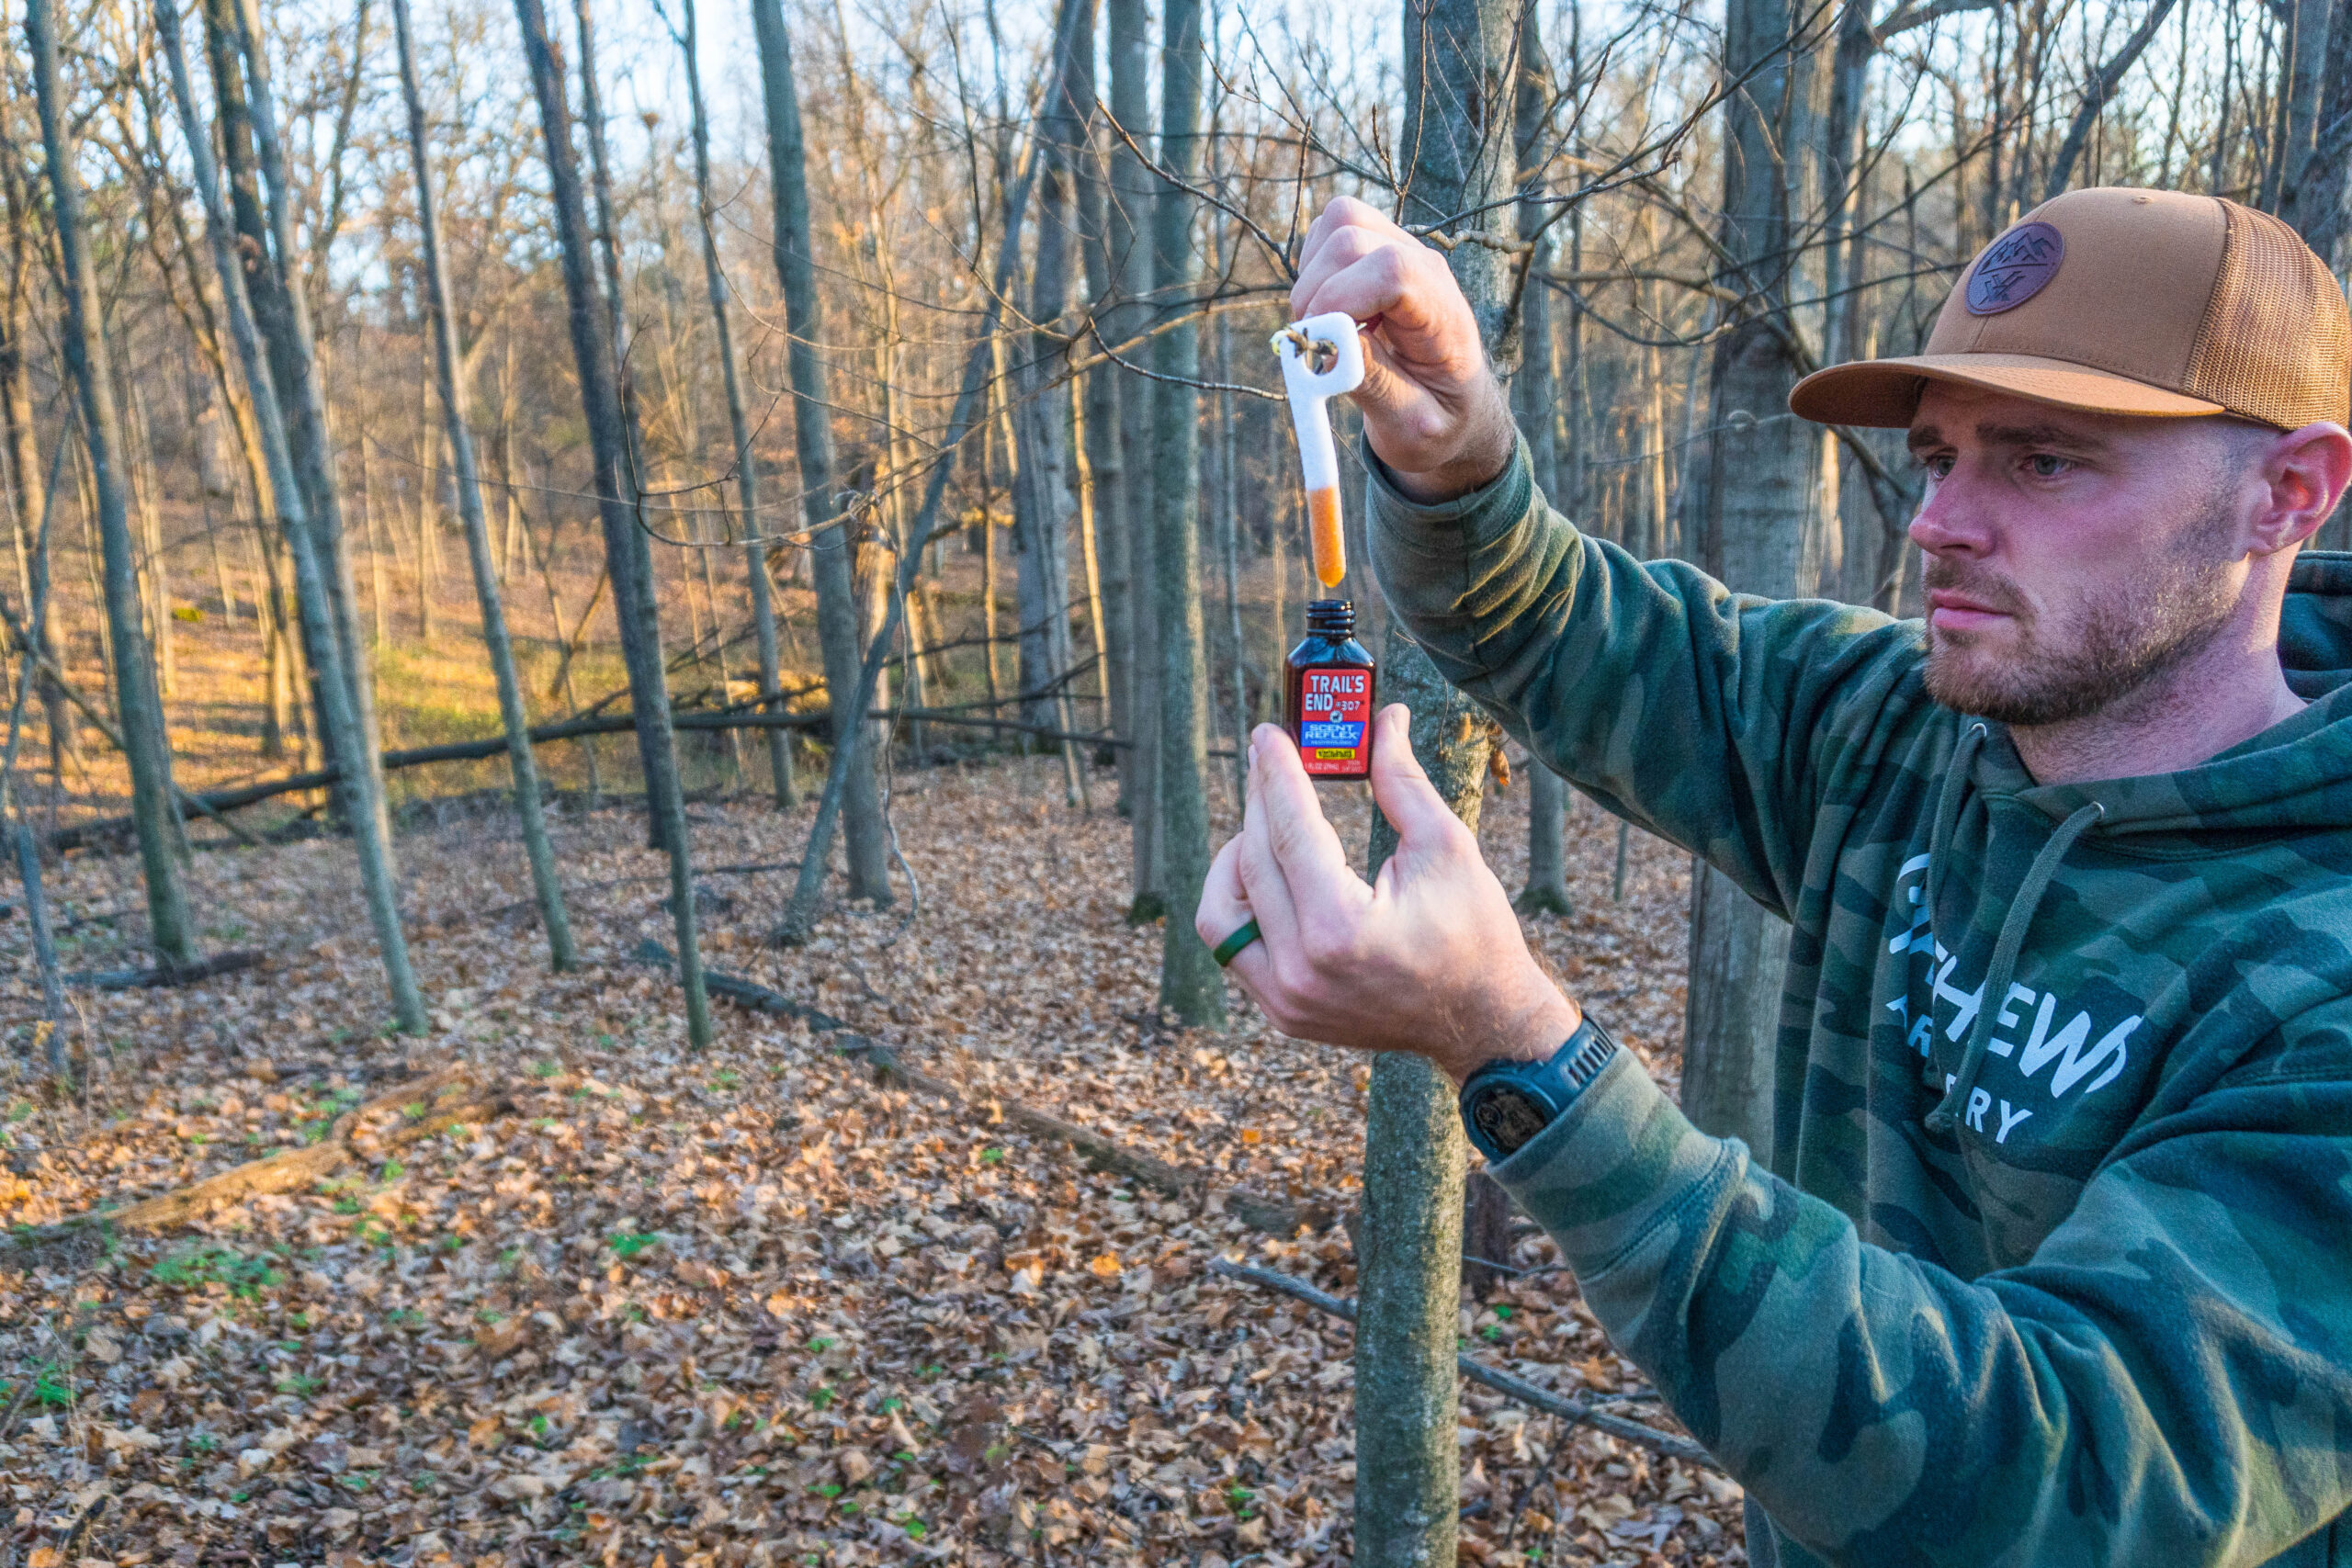 The author creates a mock scrape using a deer attractant